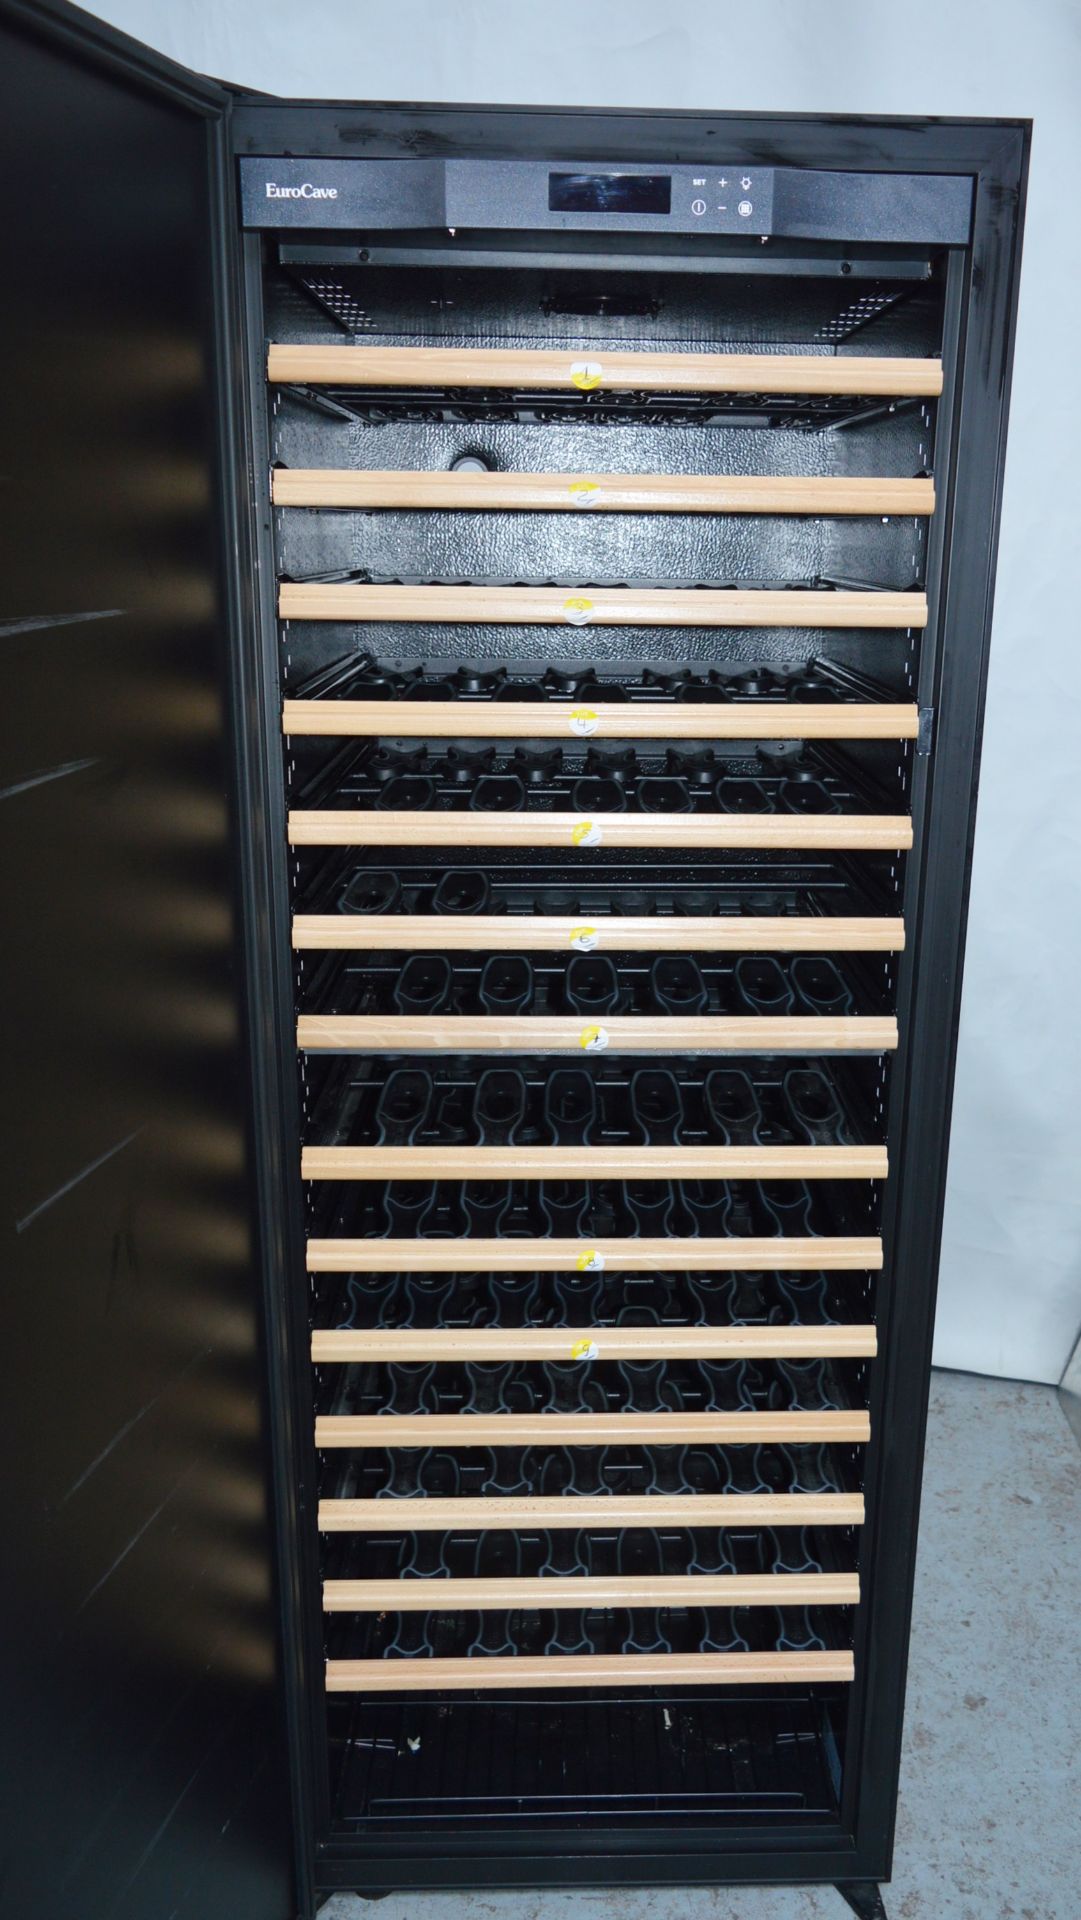 1 x Eurocave Vieilltheque Upright Temperature Controlled Wine Cooler - Mode 283V2 - CL158 - - Image 11 of 12